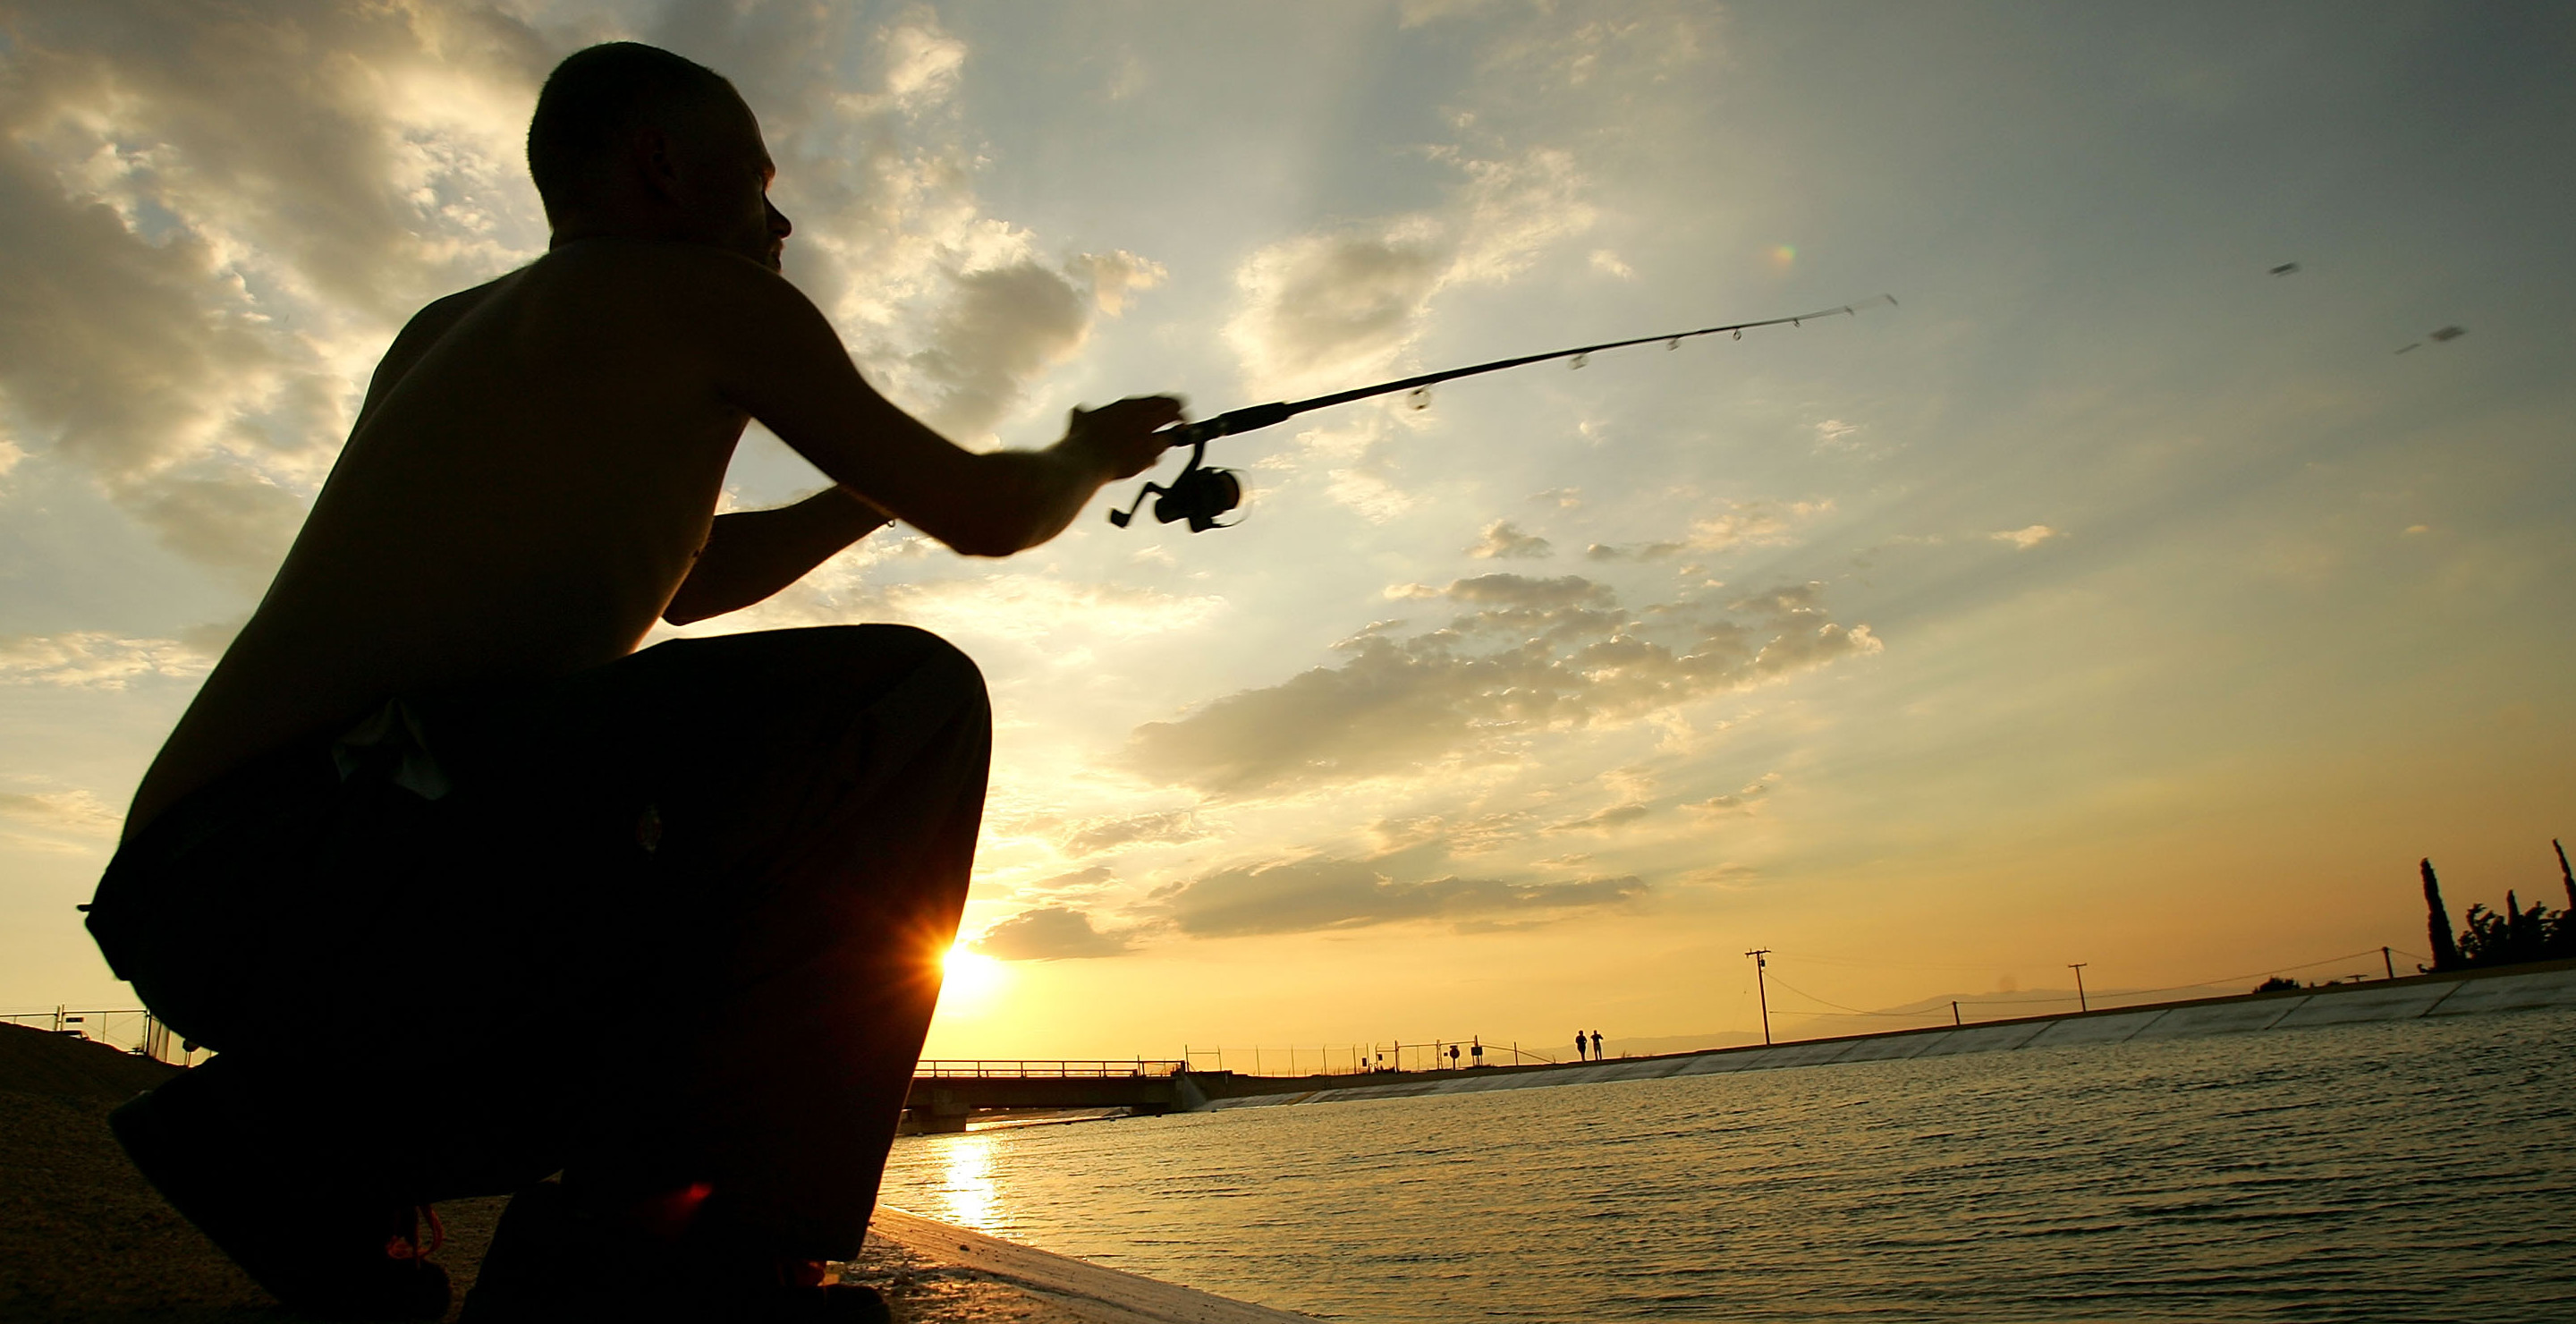 Angler Allegedly Tries To Cheat Fishing Competition With Pre-Caught Fish